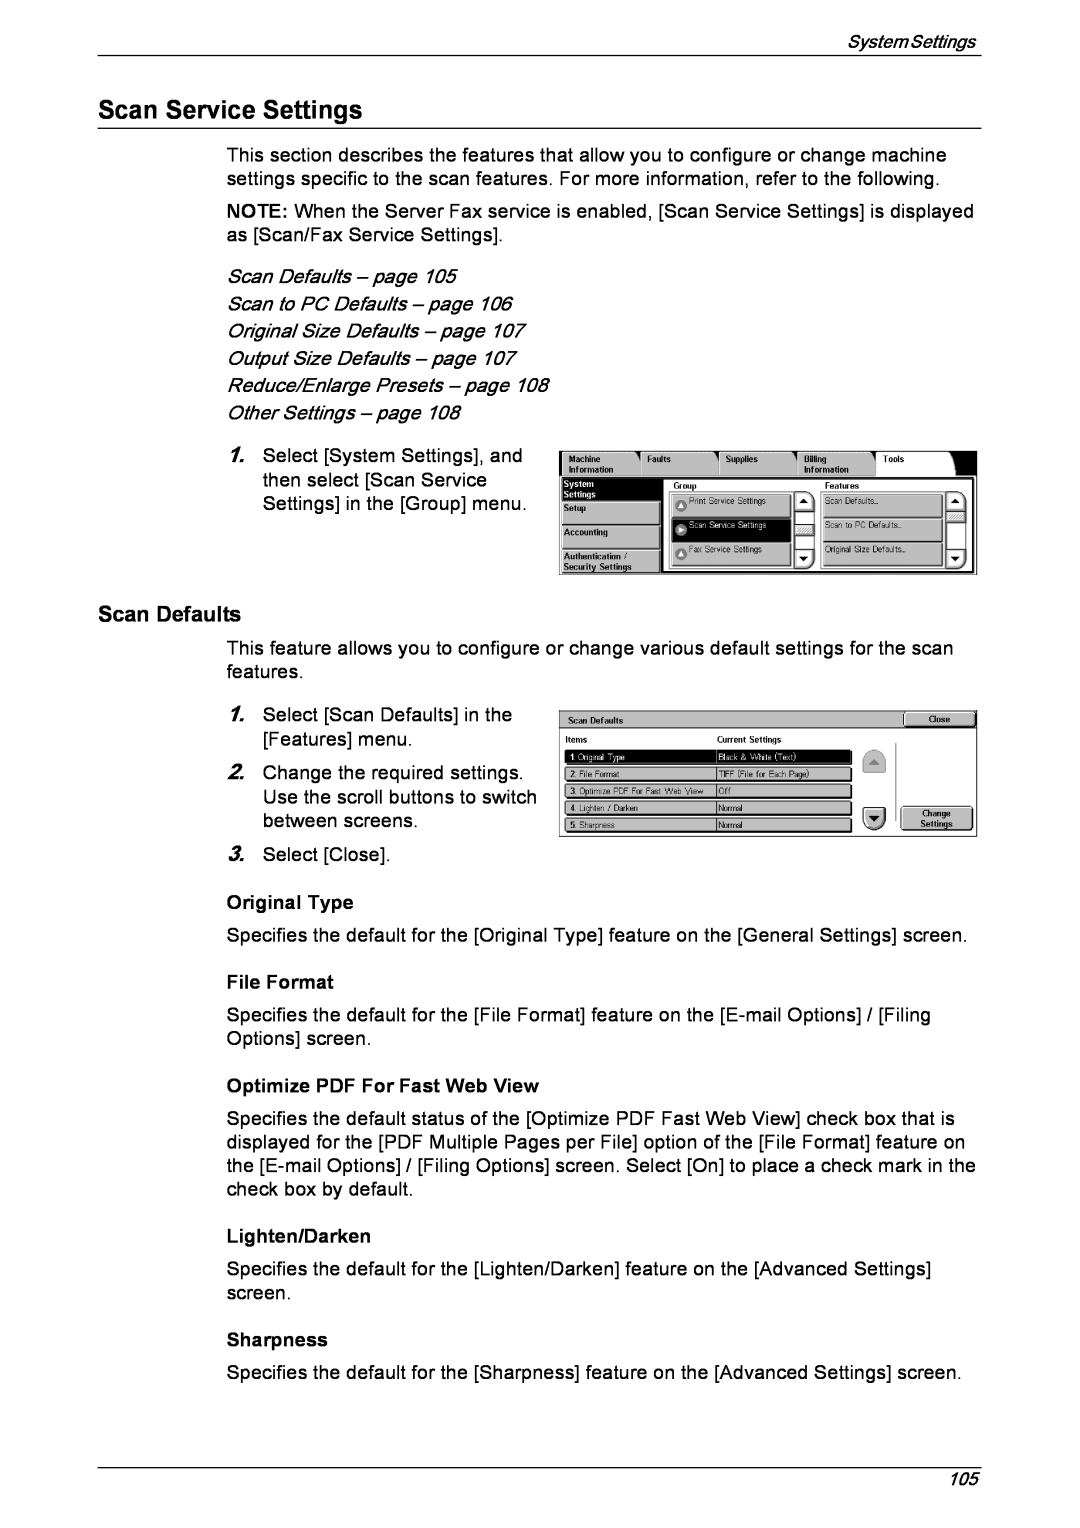 Xerox 5222 manual Scan Service Settings, Scan Defaults – page Scan to PC Defaults – page, Original Size Defaults – page 